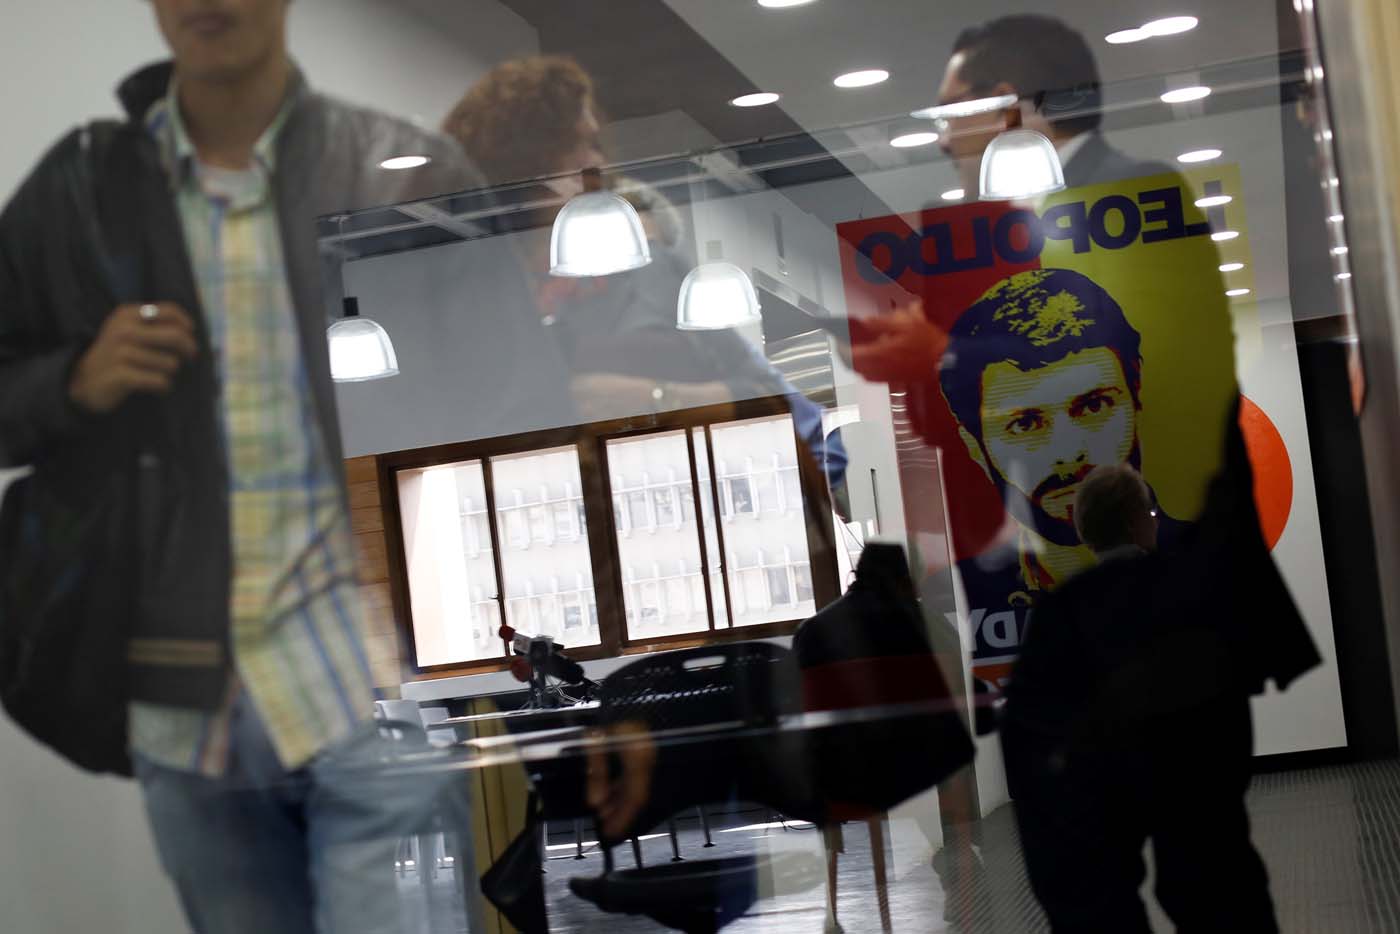 People walk next to an reflected image depicting the jailed opposition leader Leopoldo Lopez at the office of the party Popular Will (Voluntad Popular) in Caracas, Venezuela January 18, 2017. Picture taken January 18, 2017. REUTERS/Carlos Garcia Rawlins